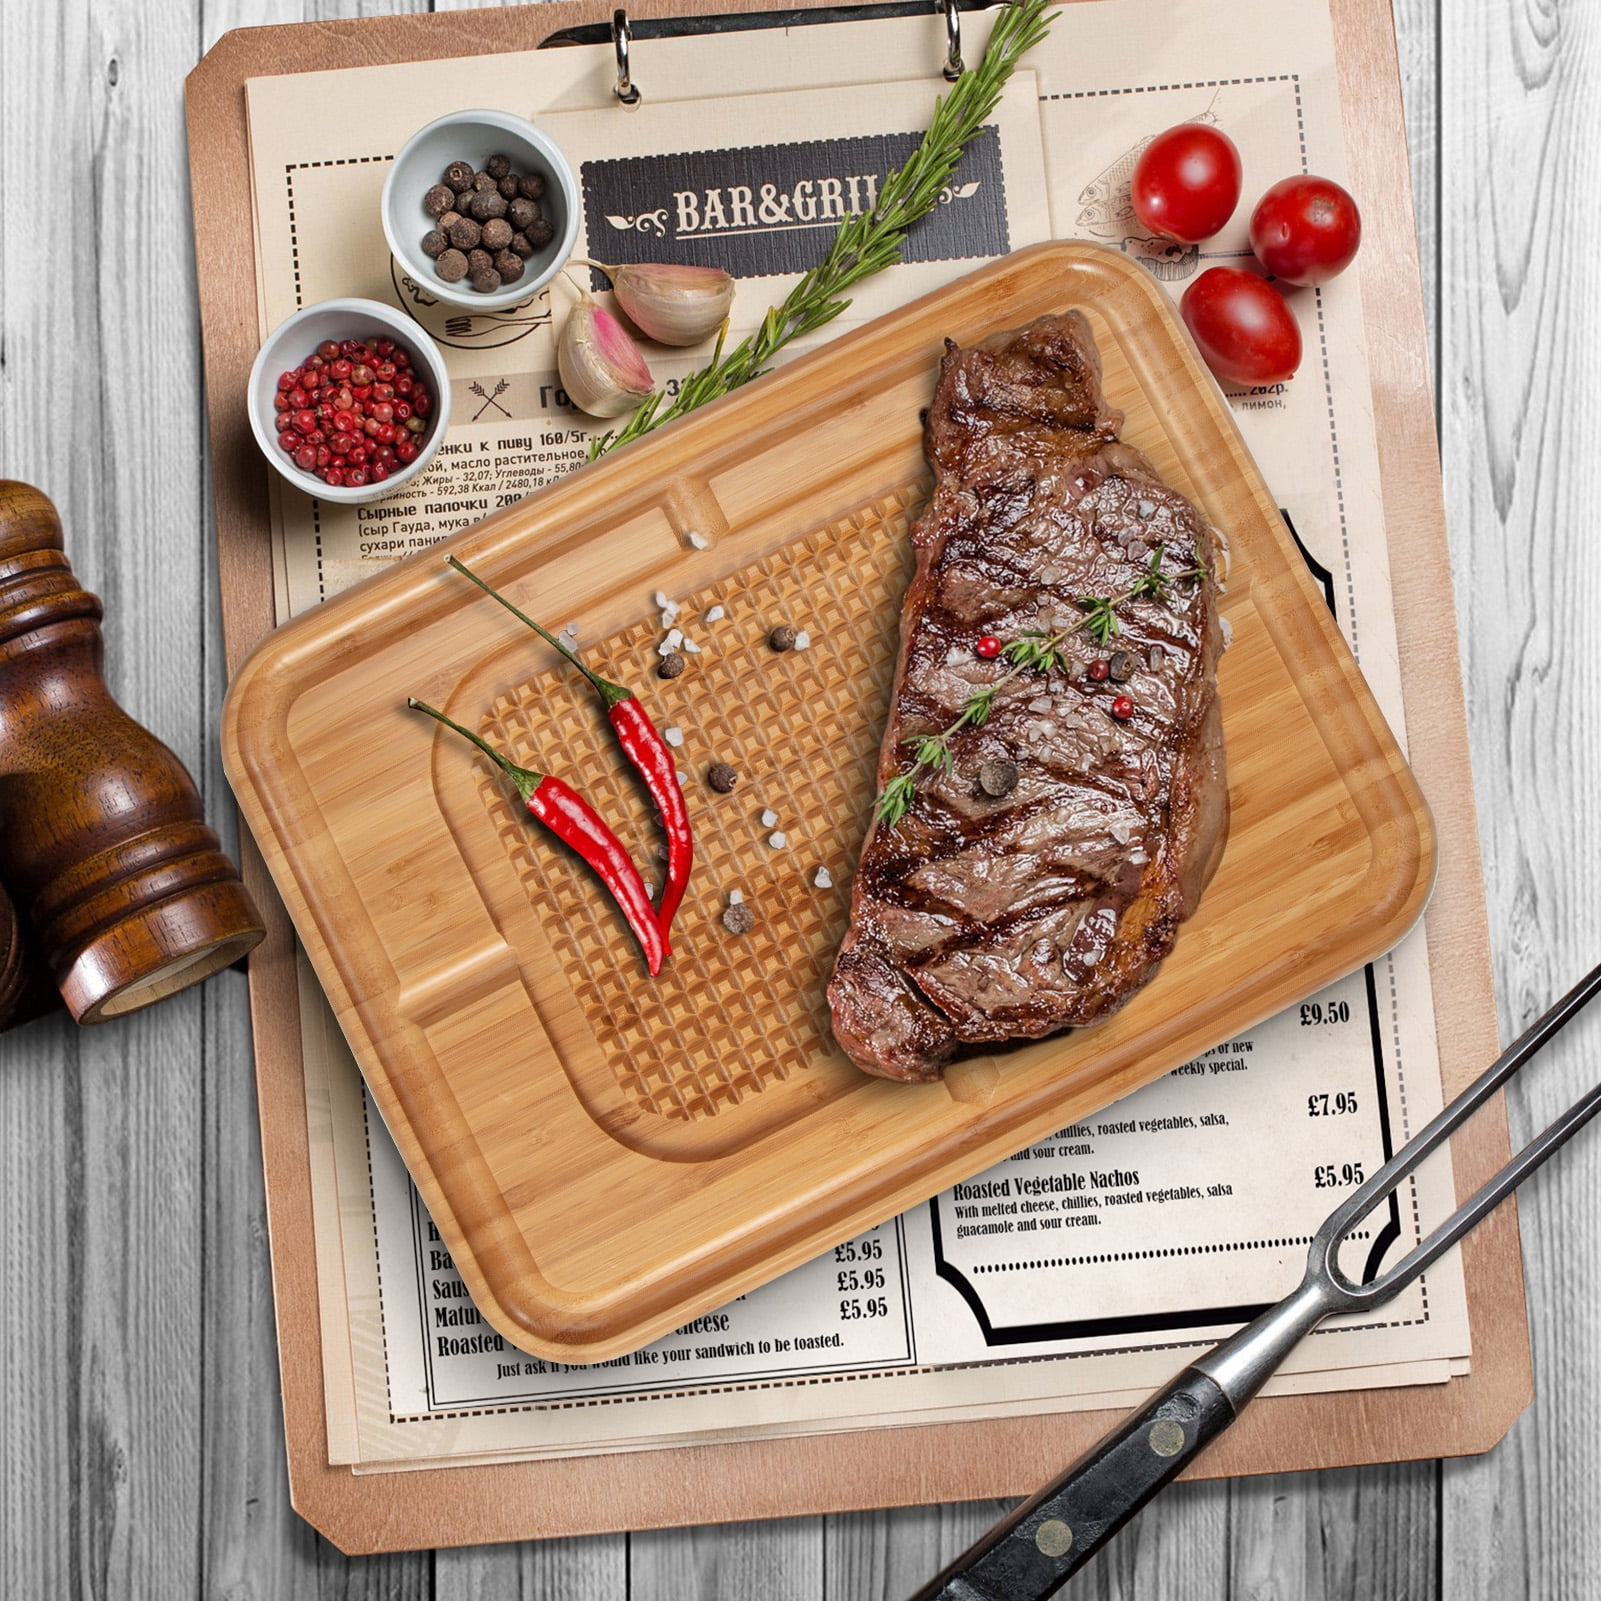 NNR Kitchen Cutting Board Round Corner Cutting Board Wooden Chopping Board  with Juice Groove Kitchen Cutting Board for Meat Fish Vegetable Cheese